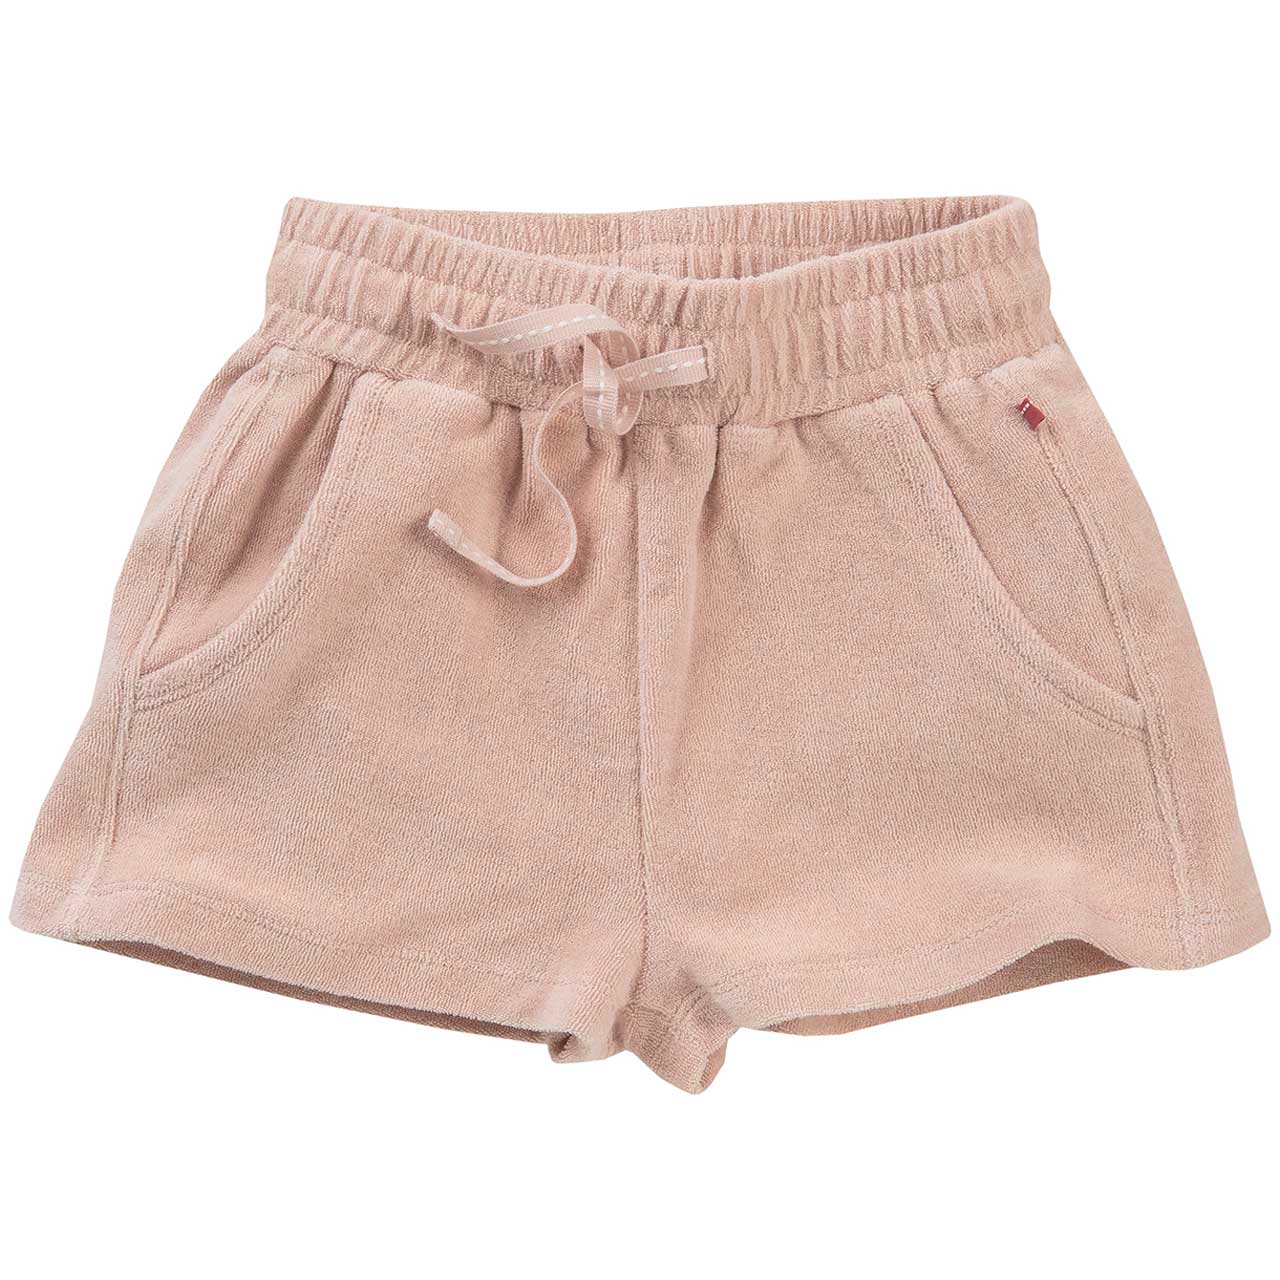 Griffige Frottee Shorts hellrosa